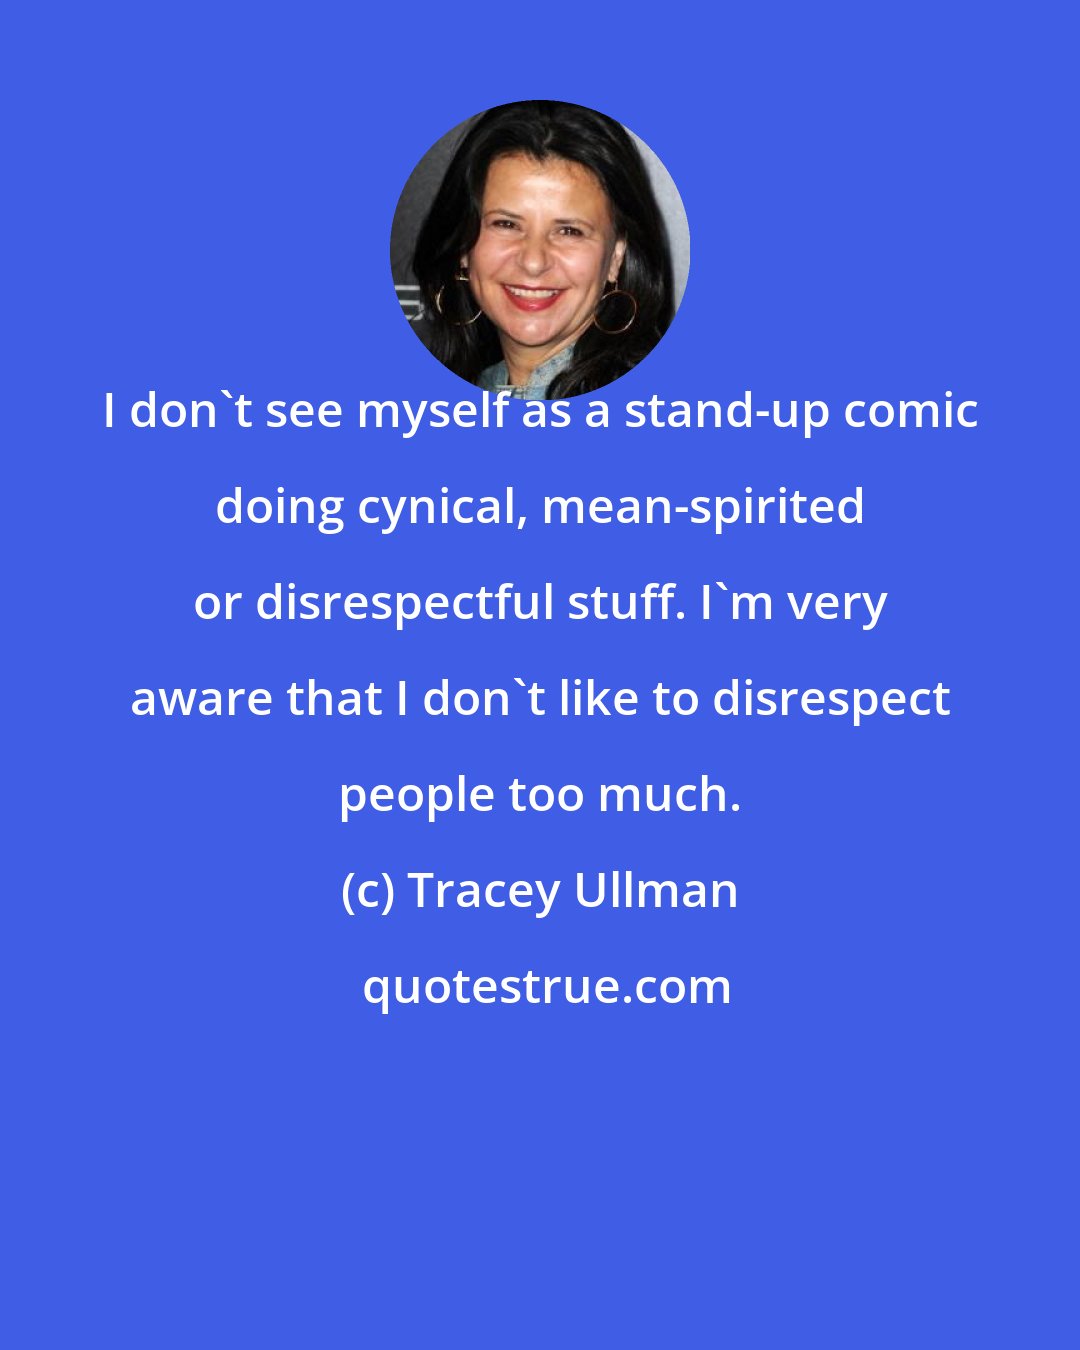 Tracey Ullman: I don't see myself as a stand-up comic doing cynical, mean-spirited or disrespectful stuff. I'm very aware that I don't like to disrespect people too much.